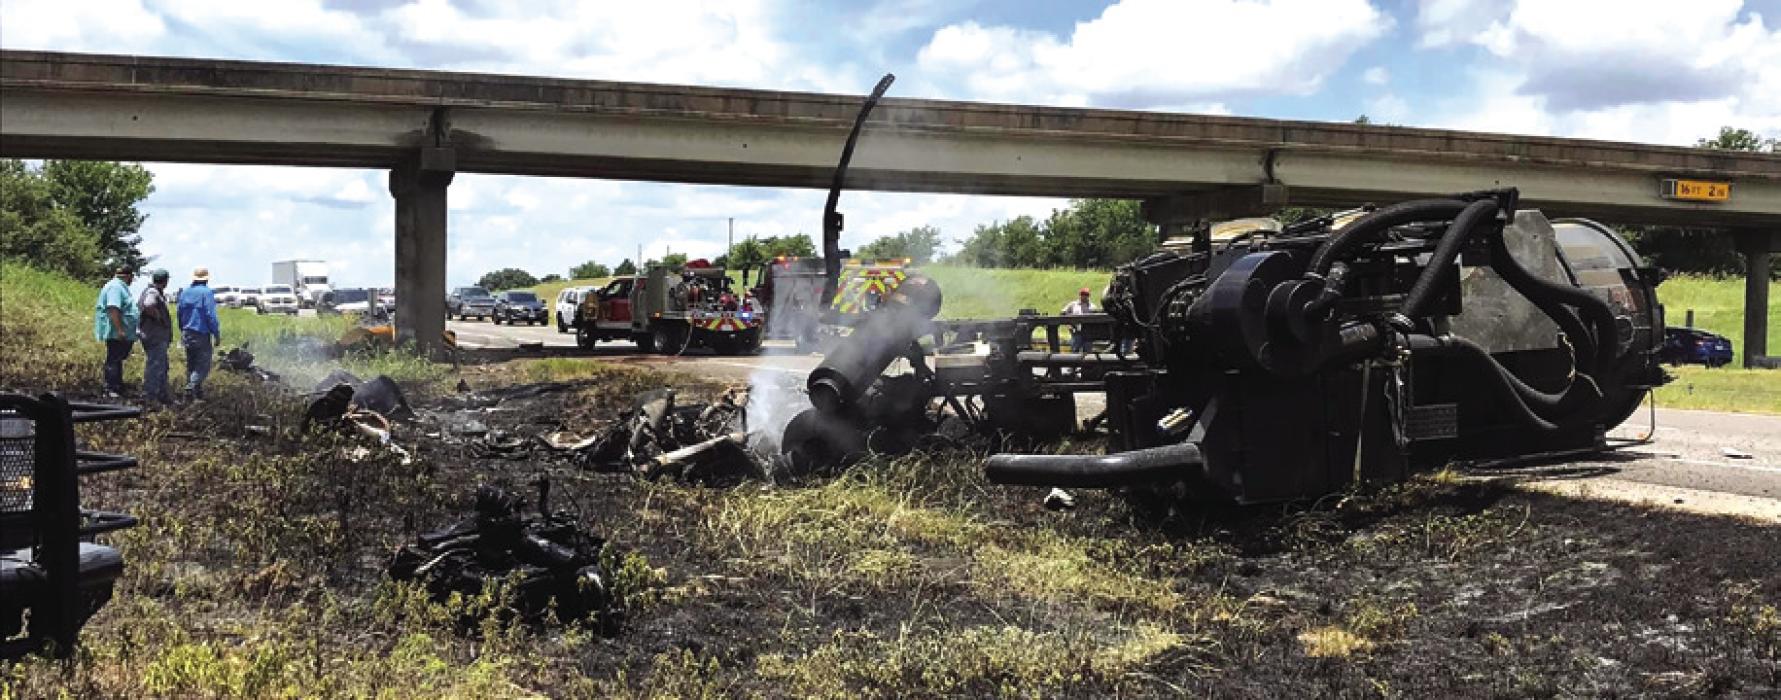 Smoking wreckage from the crash on Interstate 10 that killed Robyn Michelle Isadore, 49, of Beaumont Saturday.